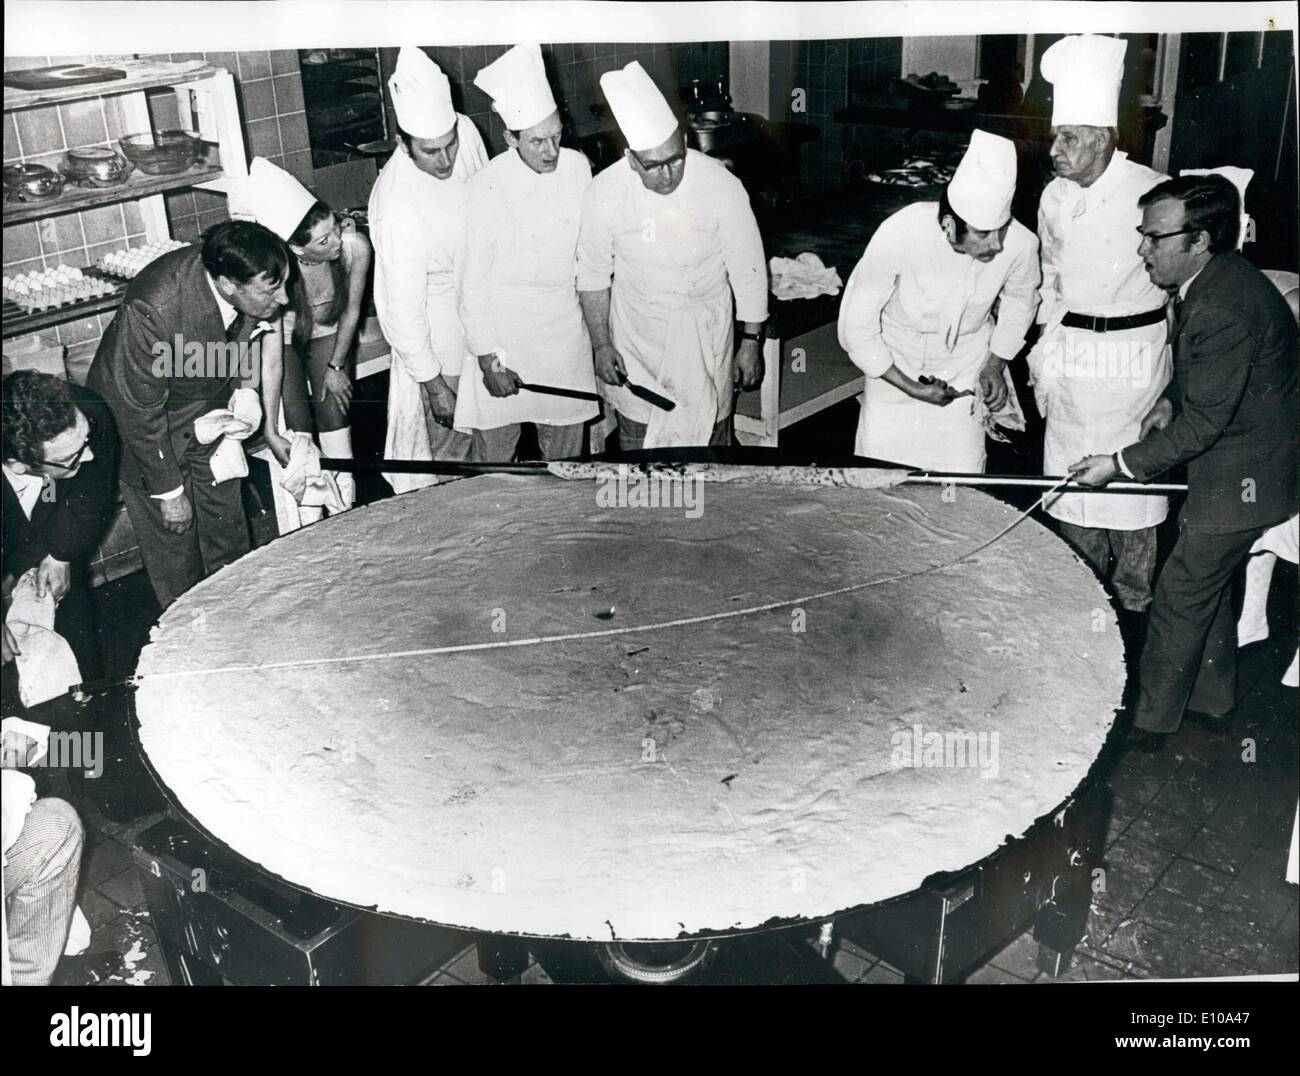 Feb. 17, 1972 - FEBRUARY 17th. 1972. ROW ABOUT THIS FOR A PANCAKE! Take 60 eggs, 30 pints of milk and 12 lbs of flour - and what have you got? Probably the worlds largest pancake, Measuring 8ft,lins and 25ft 2i ins in circumference, it was made at the Palace Hotel, Torquay, by the head chef, Mr, Henry Garrieh, and it is hoped to have it in the Guinness Book of Records as the world!s largest pancake. Mr, Garriek had the help of five other chefs at the hotel to produce the monster pancake, seen here being measured Stock Photo